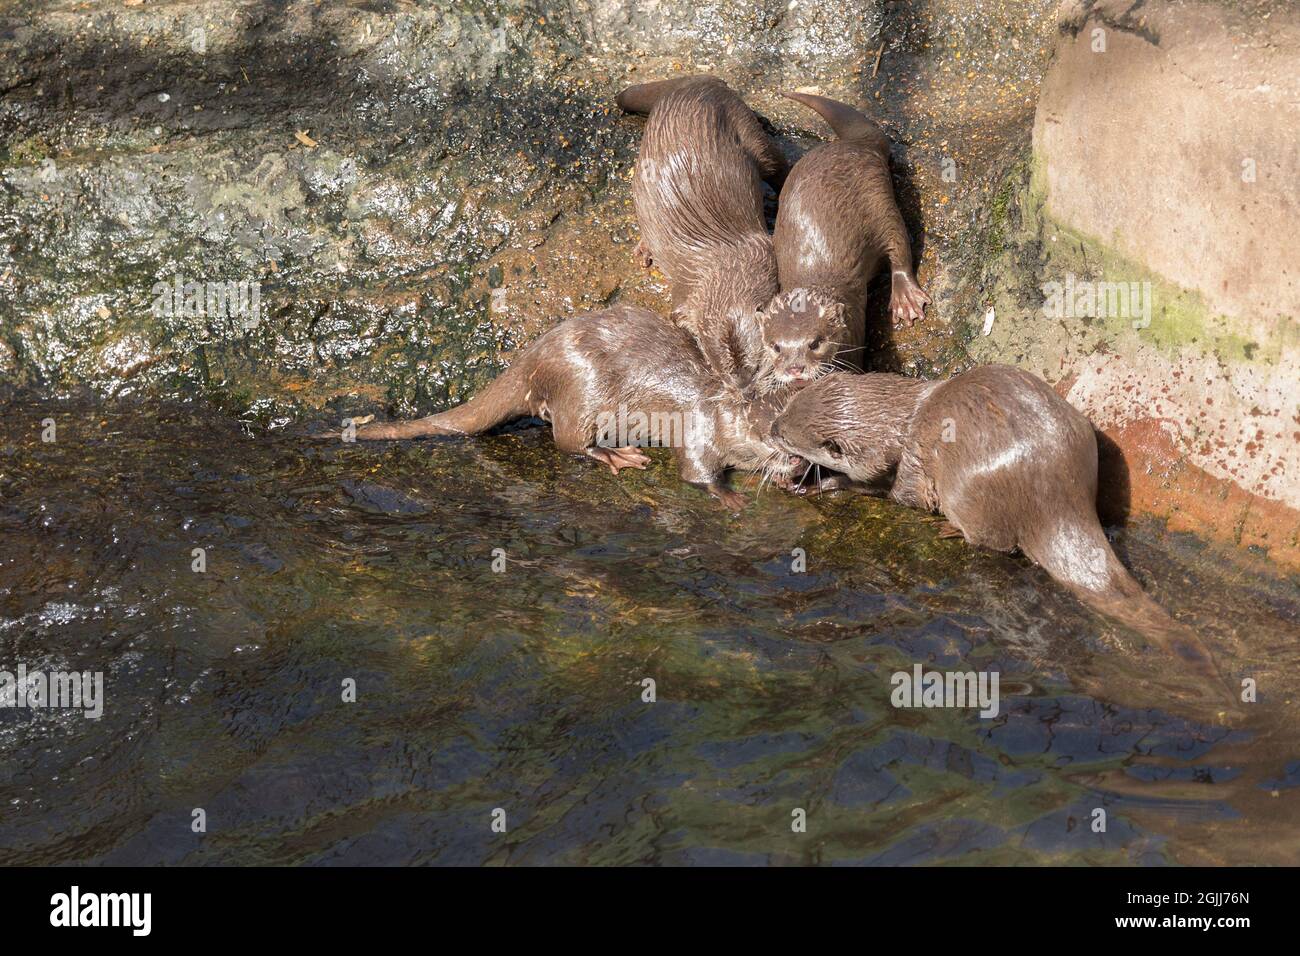 Asian Short clawed otters in a pool in enclosure at newforest wildlife park uk play fighting webbed feet thick tapered tails small ears dog like face Stock Photo